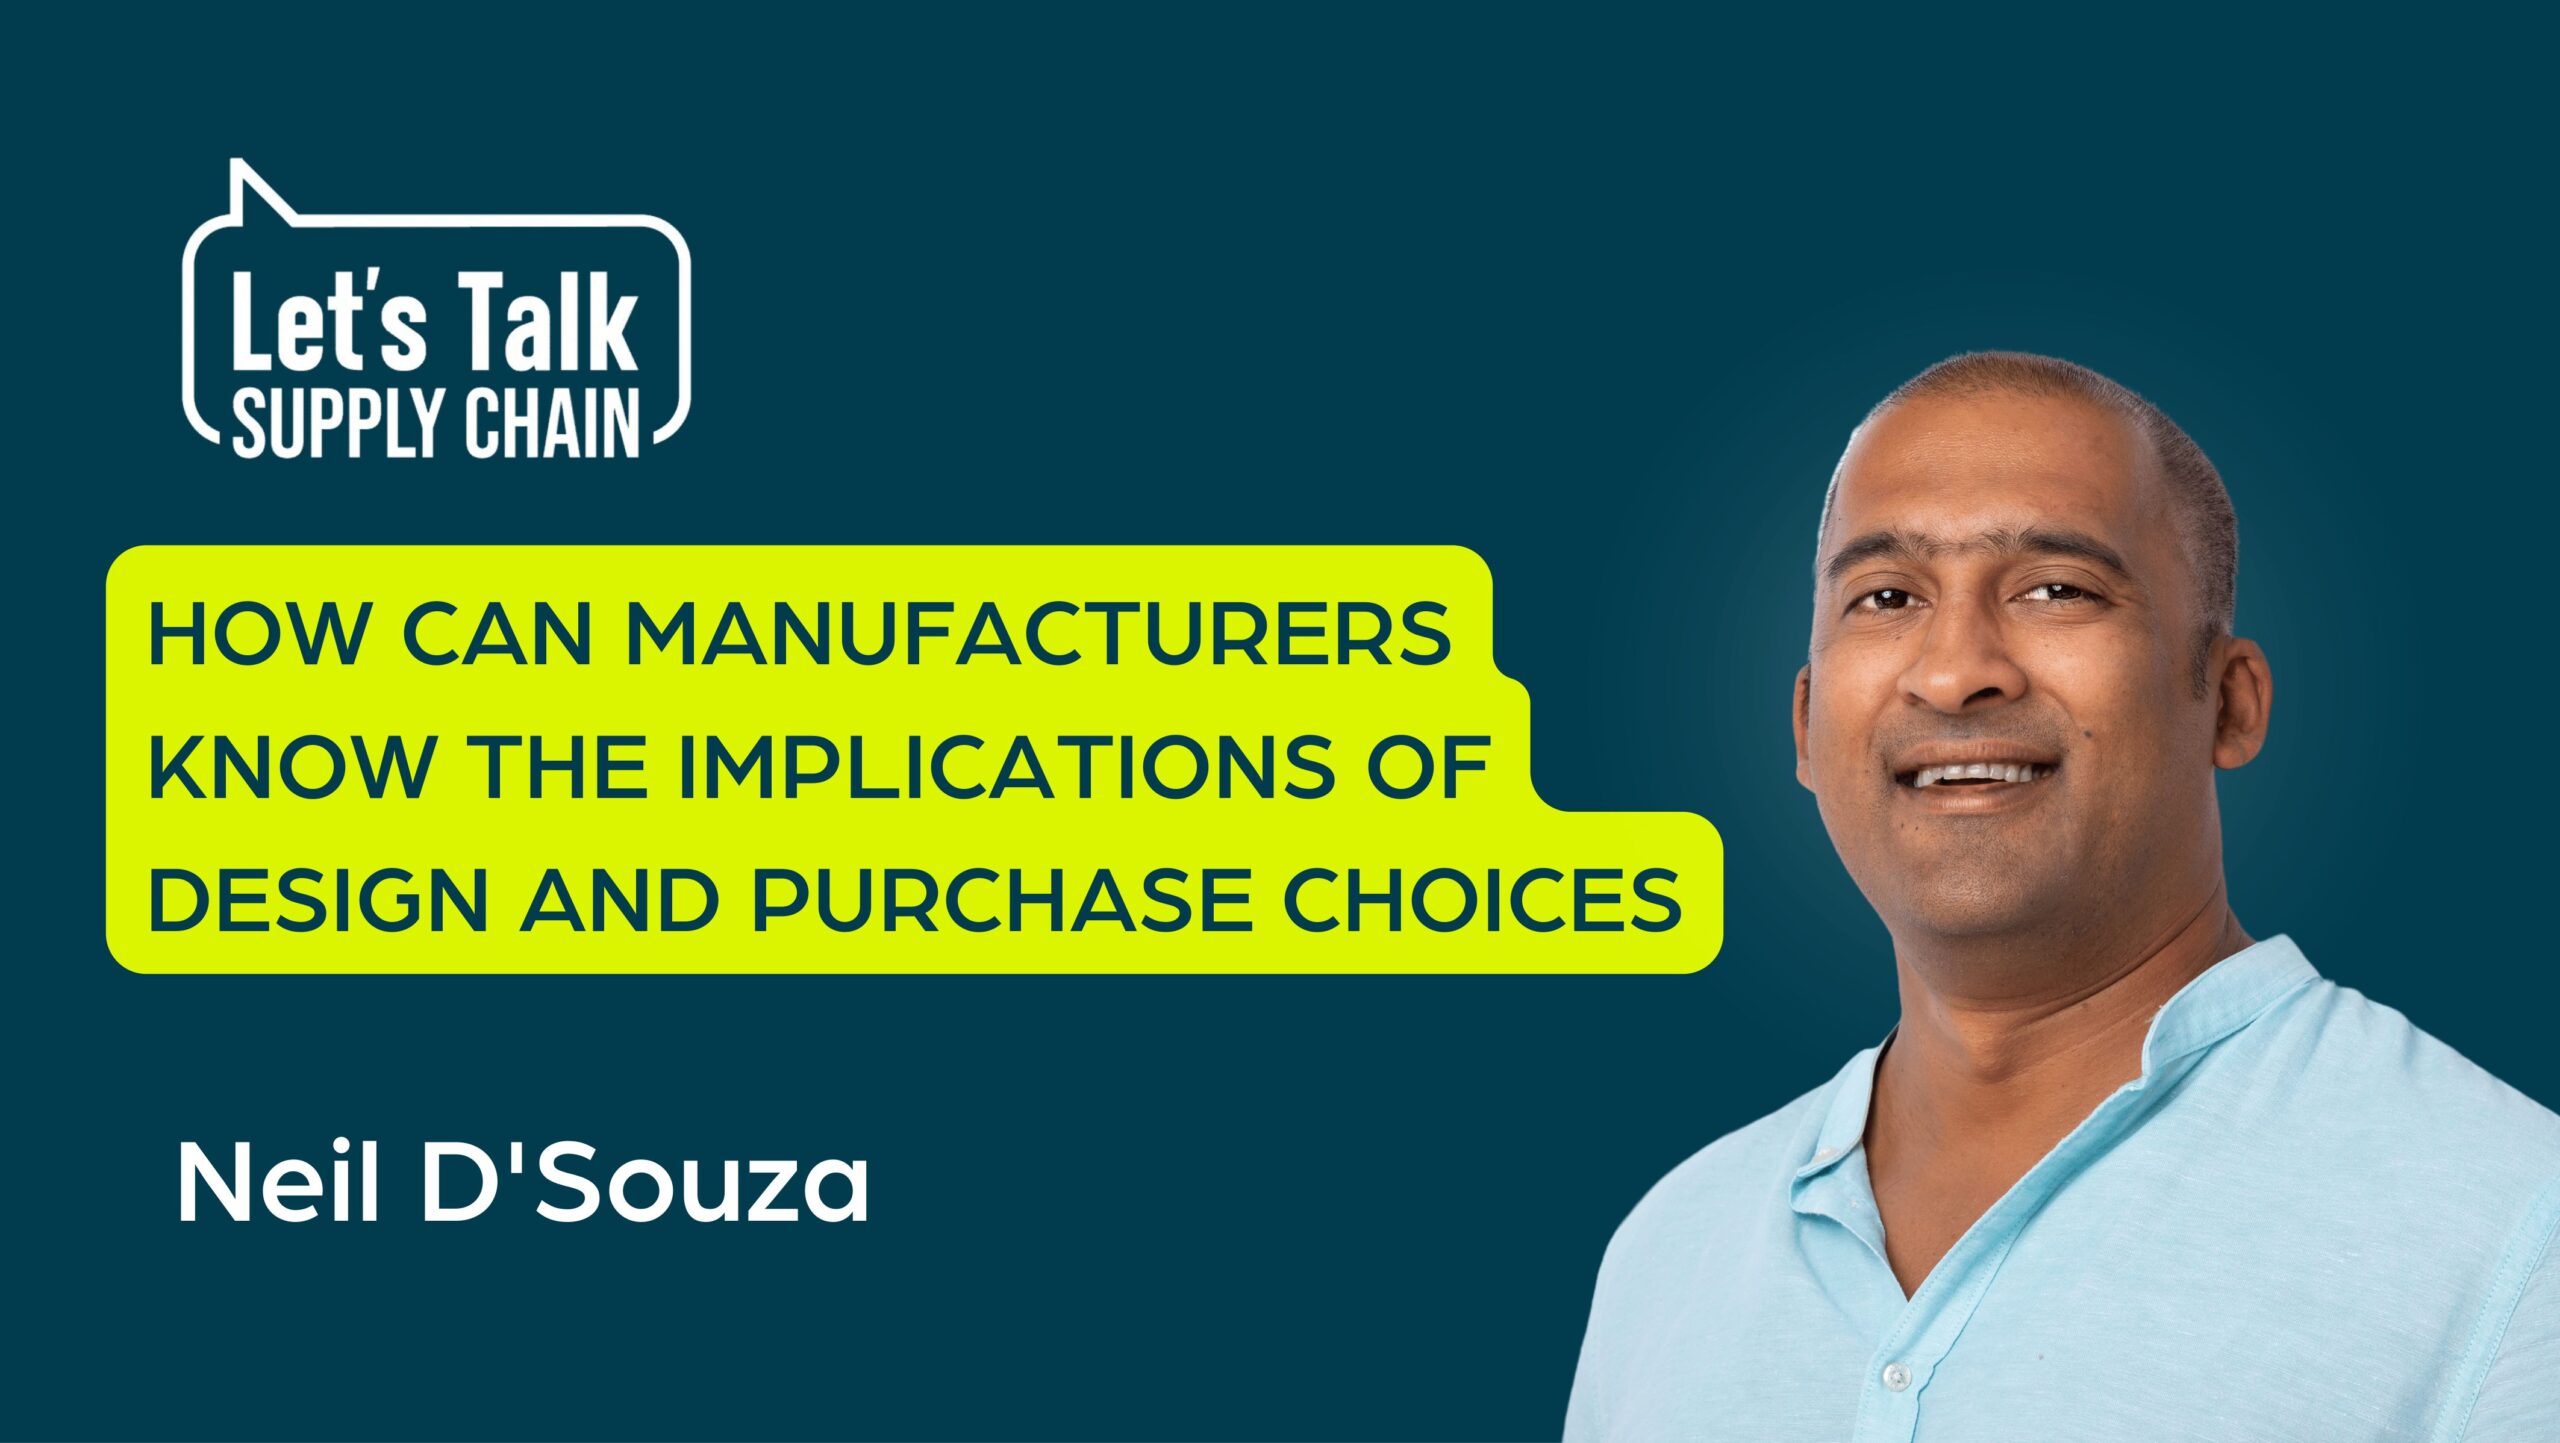 How can manufacturers know the implications of design and purchase choices